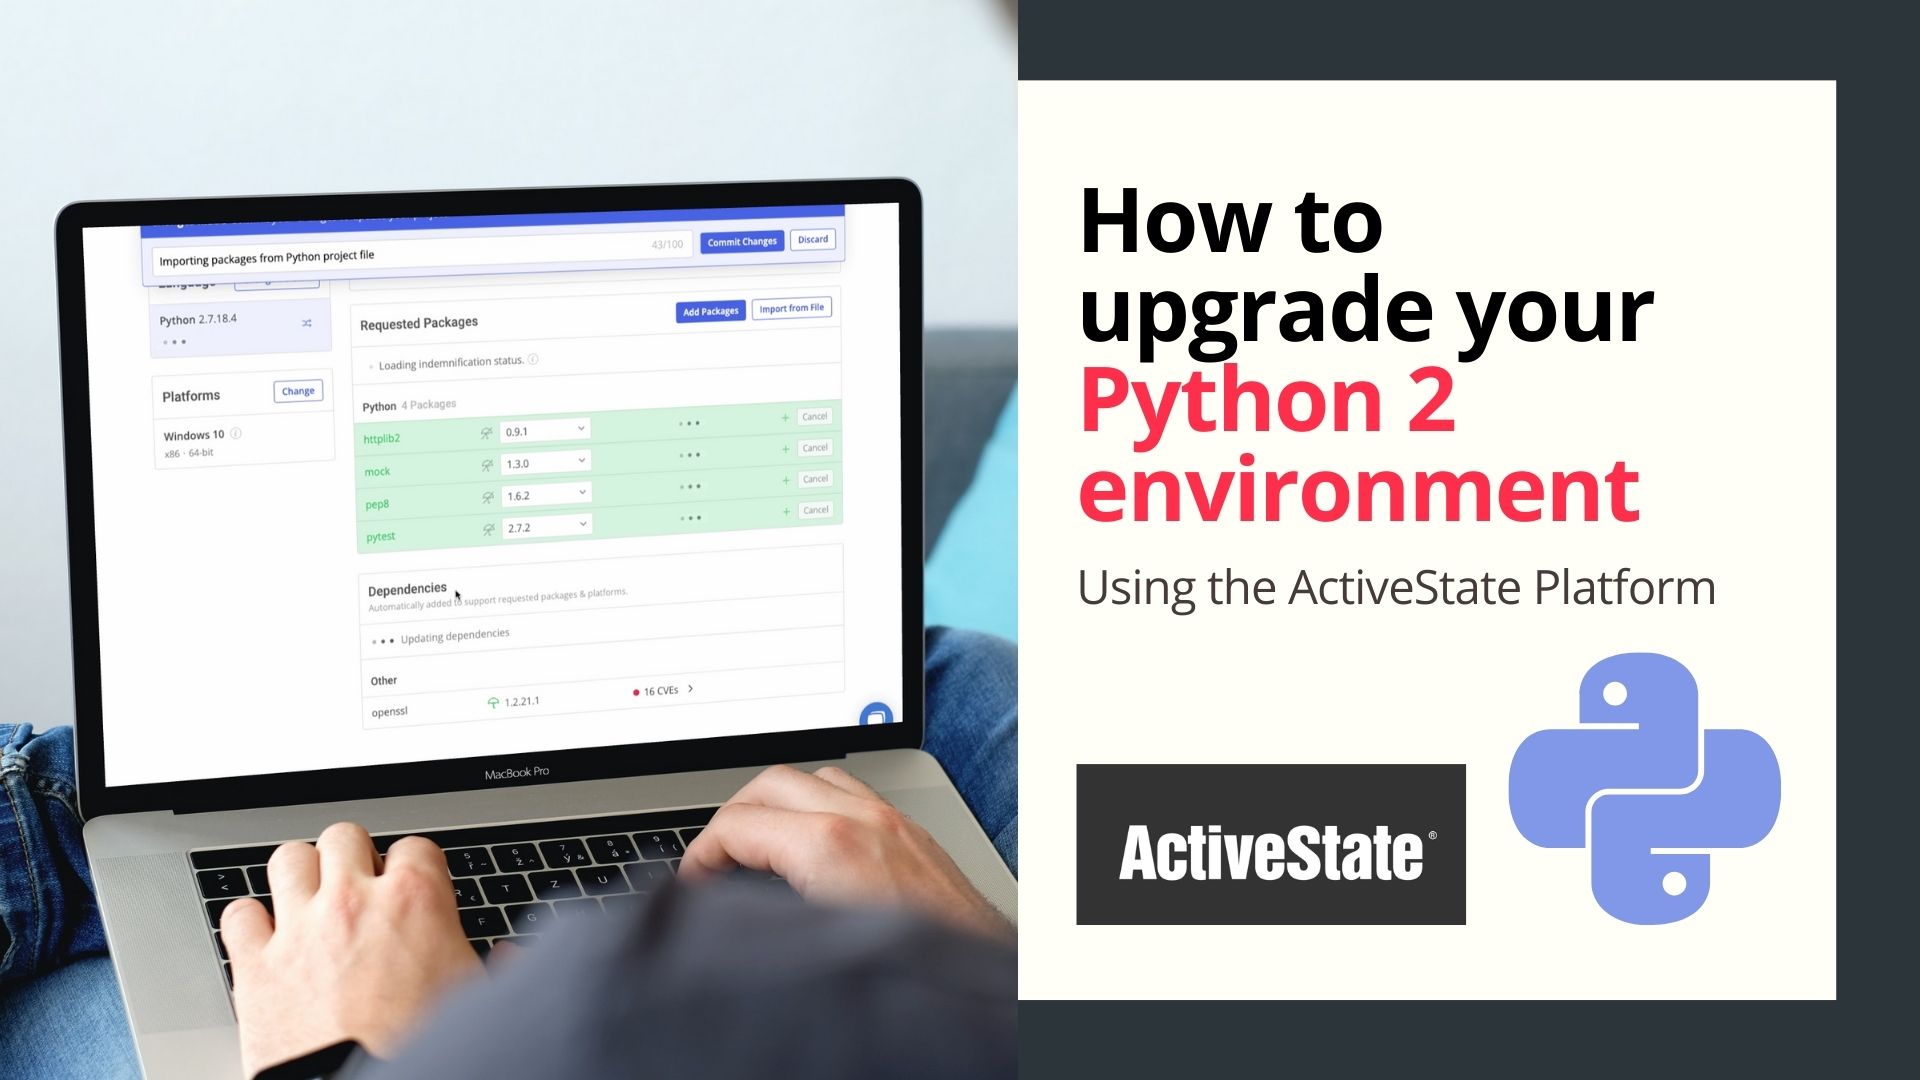 How to upgrade your Python 2 environment using the ActiveState Platform